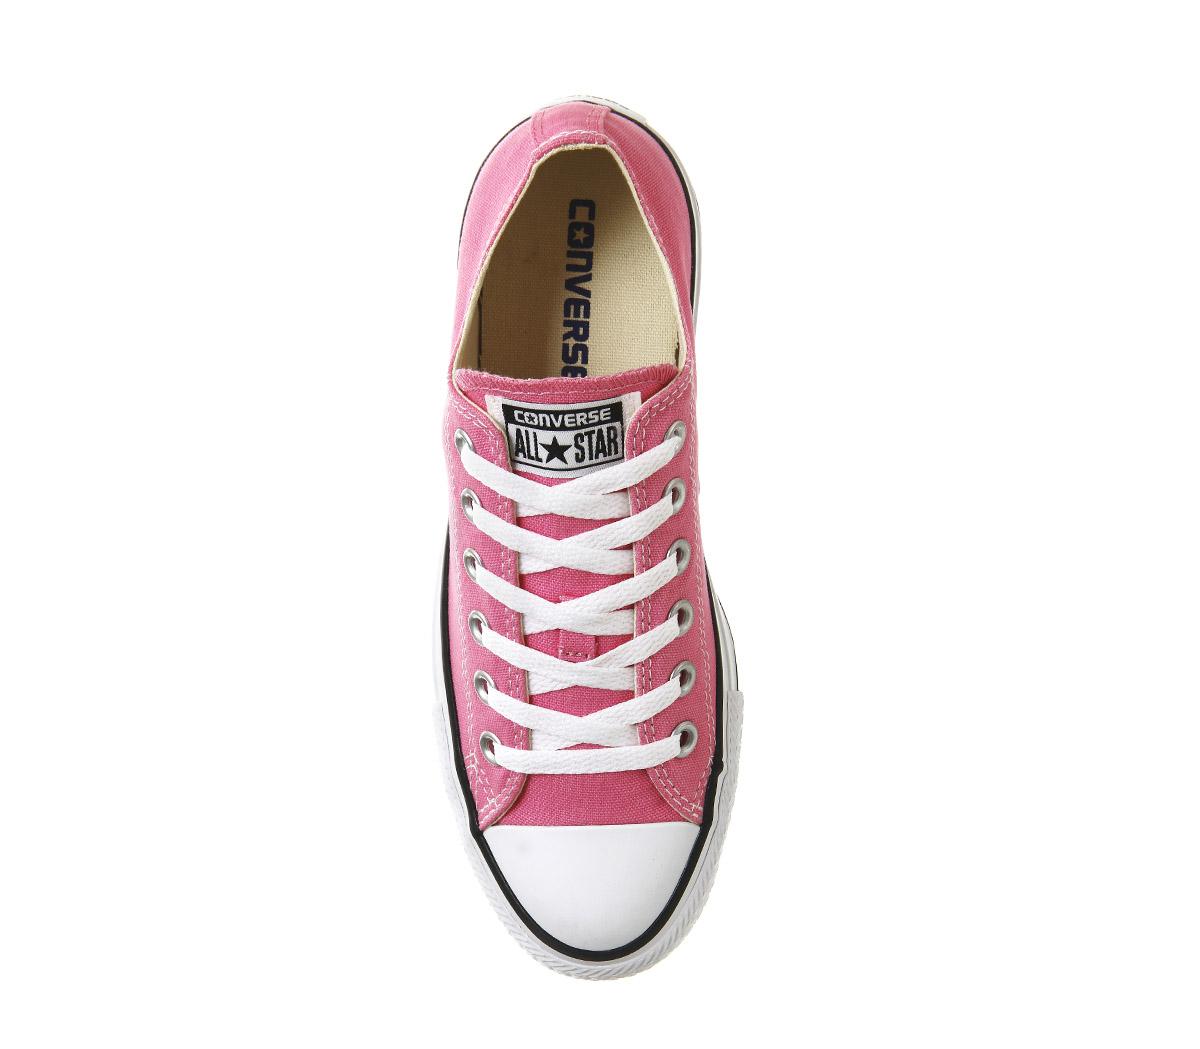 Converse All Star Low Pink Canvas - Hers trainers